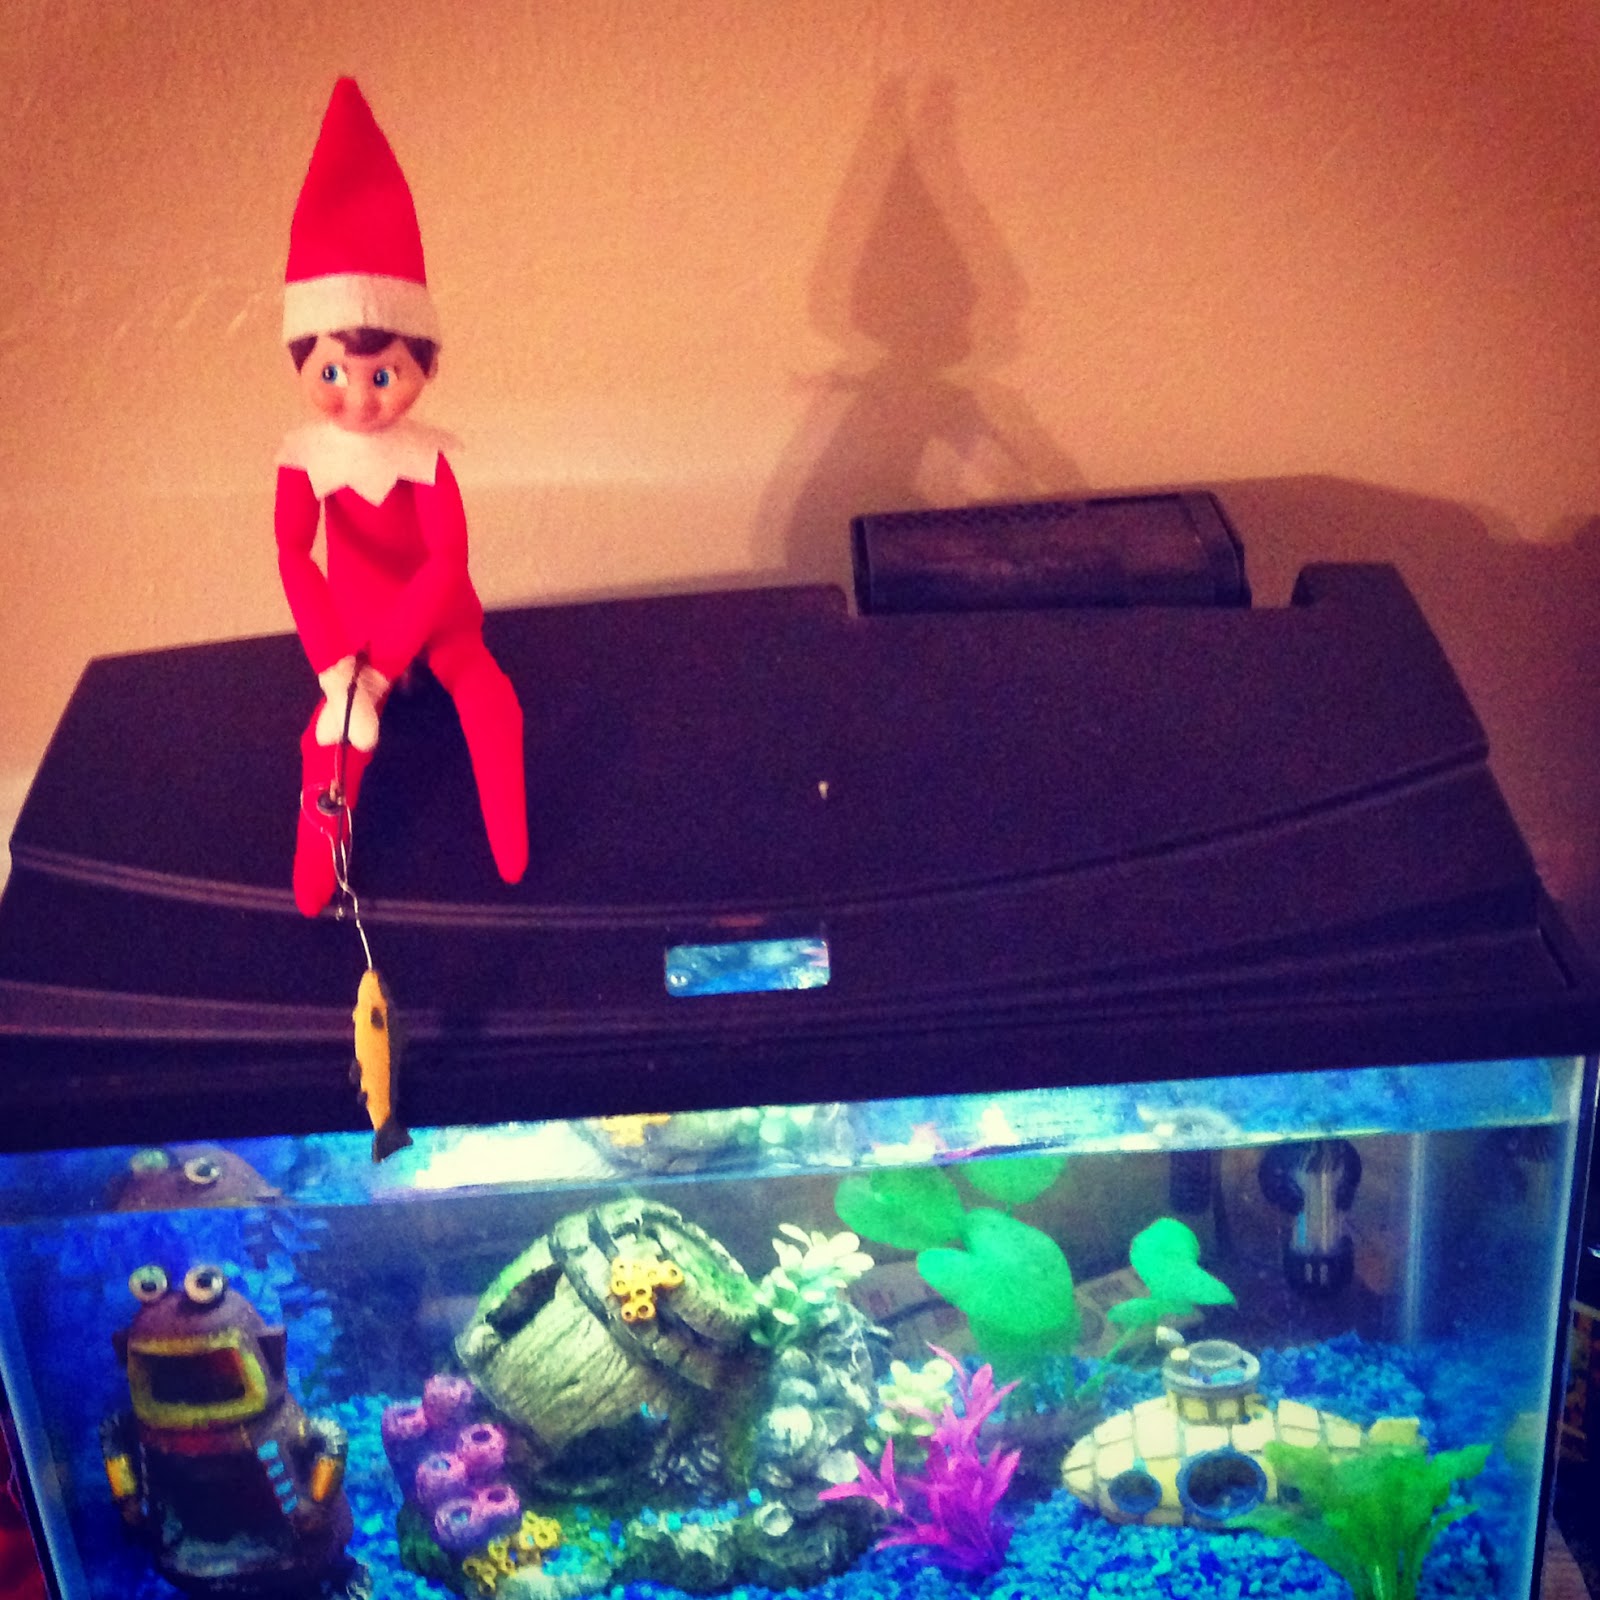 Elf on the Shelf: Week 4 - Building Our Story